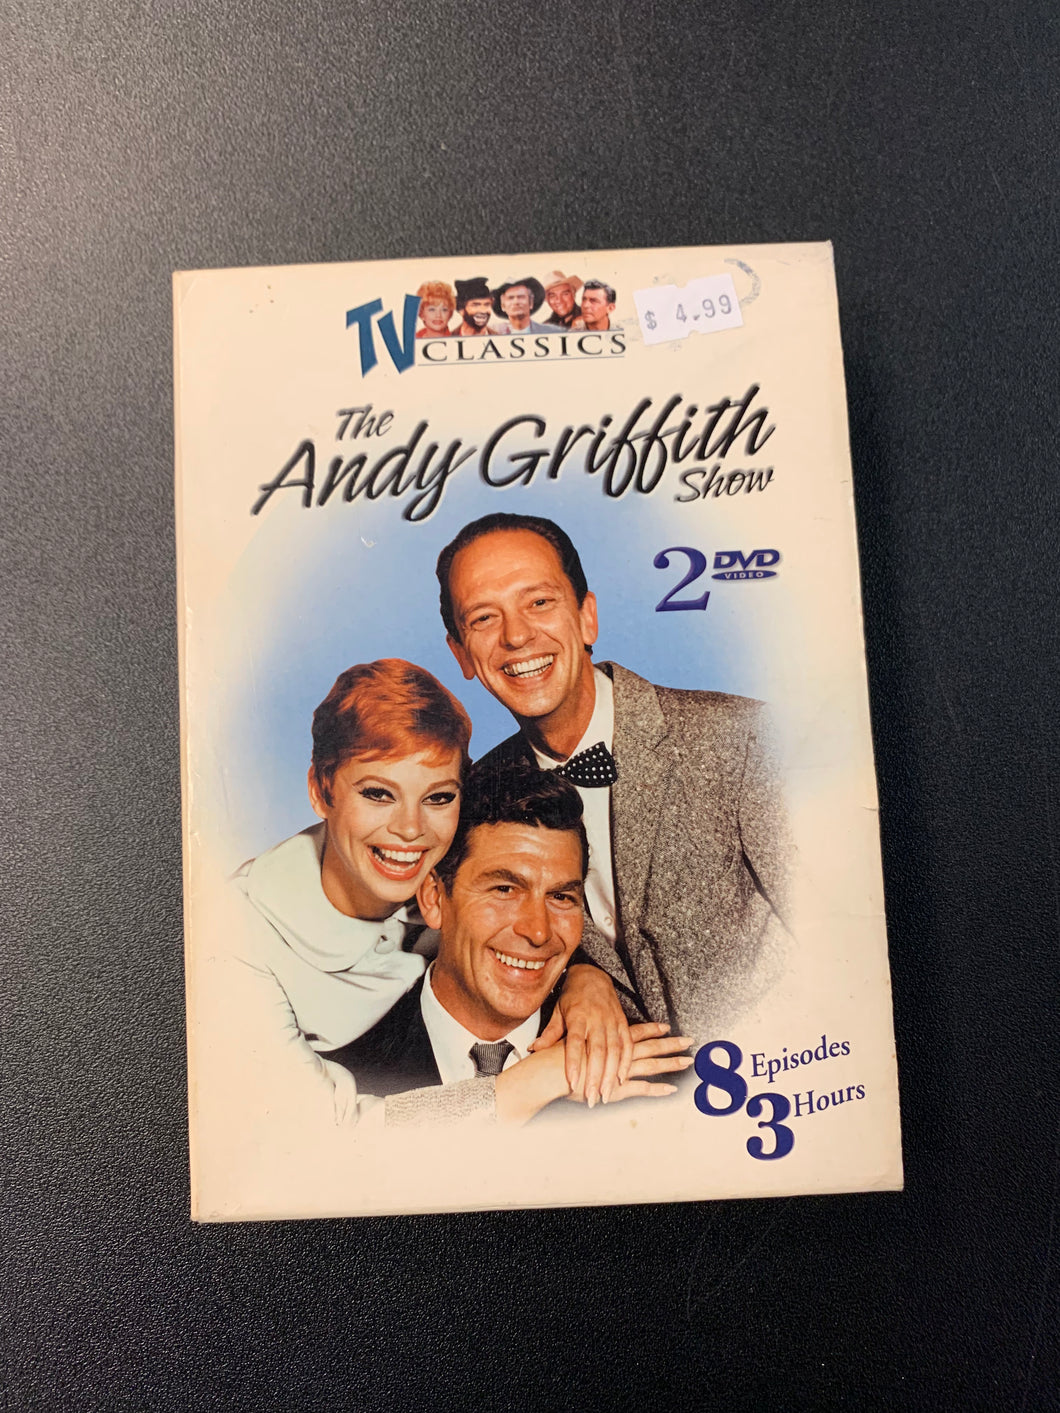 TV CLASSICS THE ANDY GRIFFITH SHOW 2 DVD SET PREOWNED